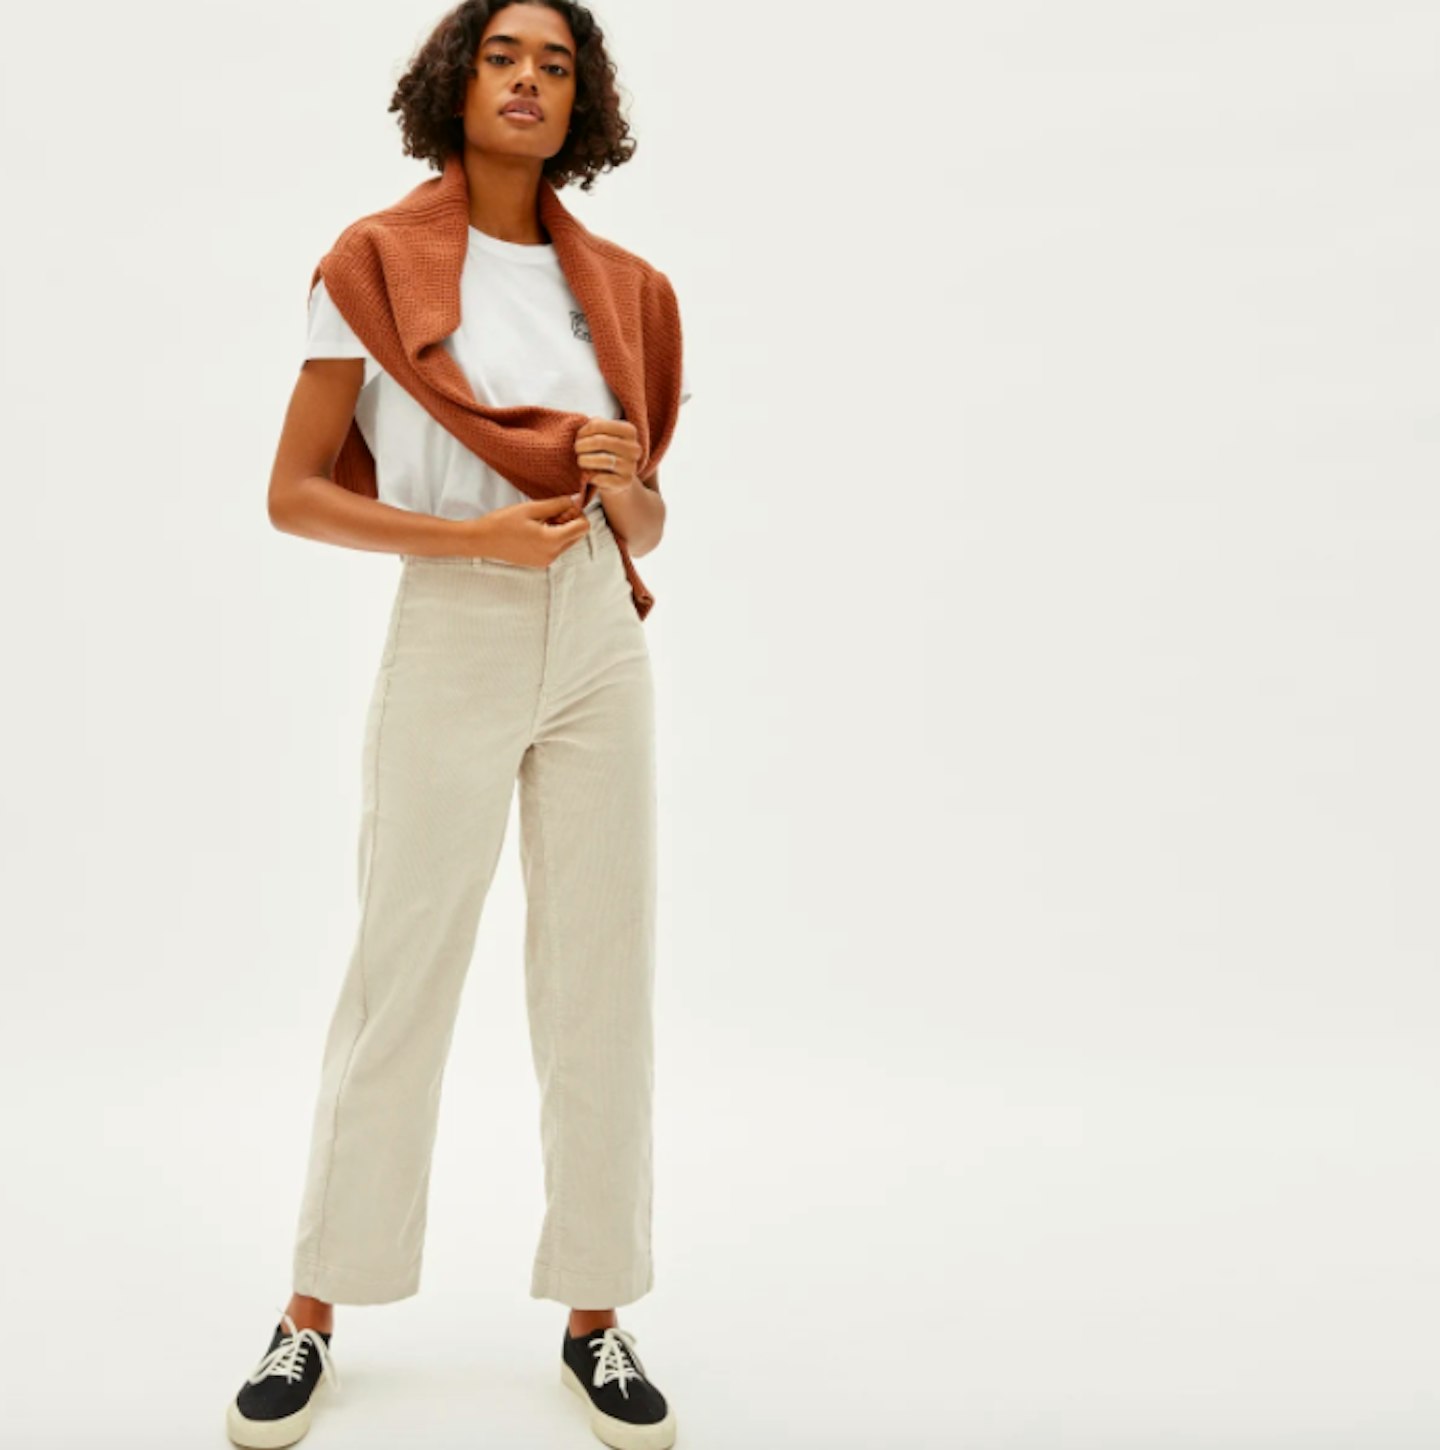 The Corduroy Wide Leg Trousers, £76